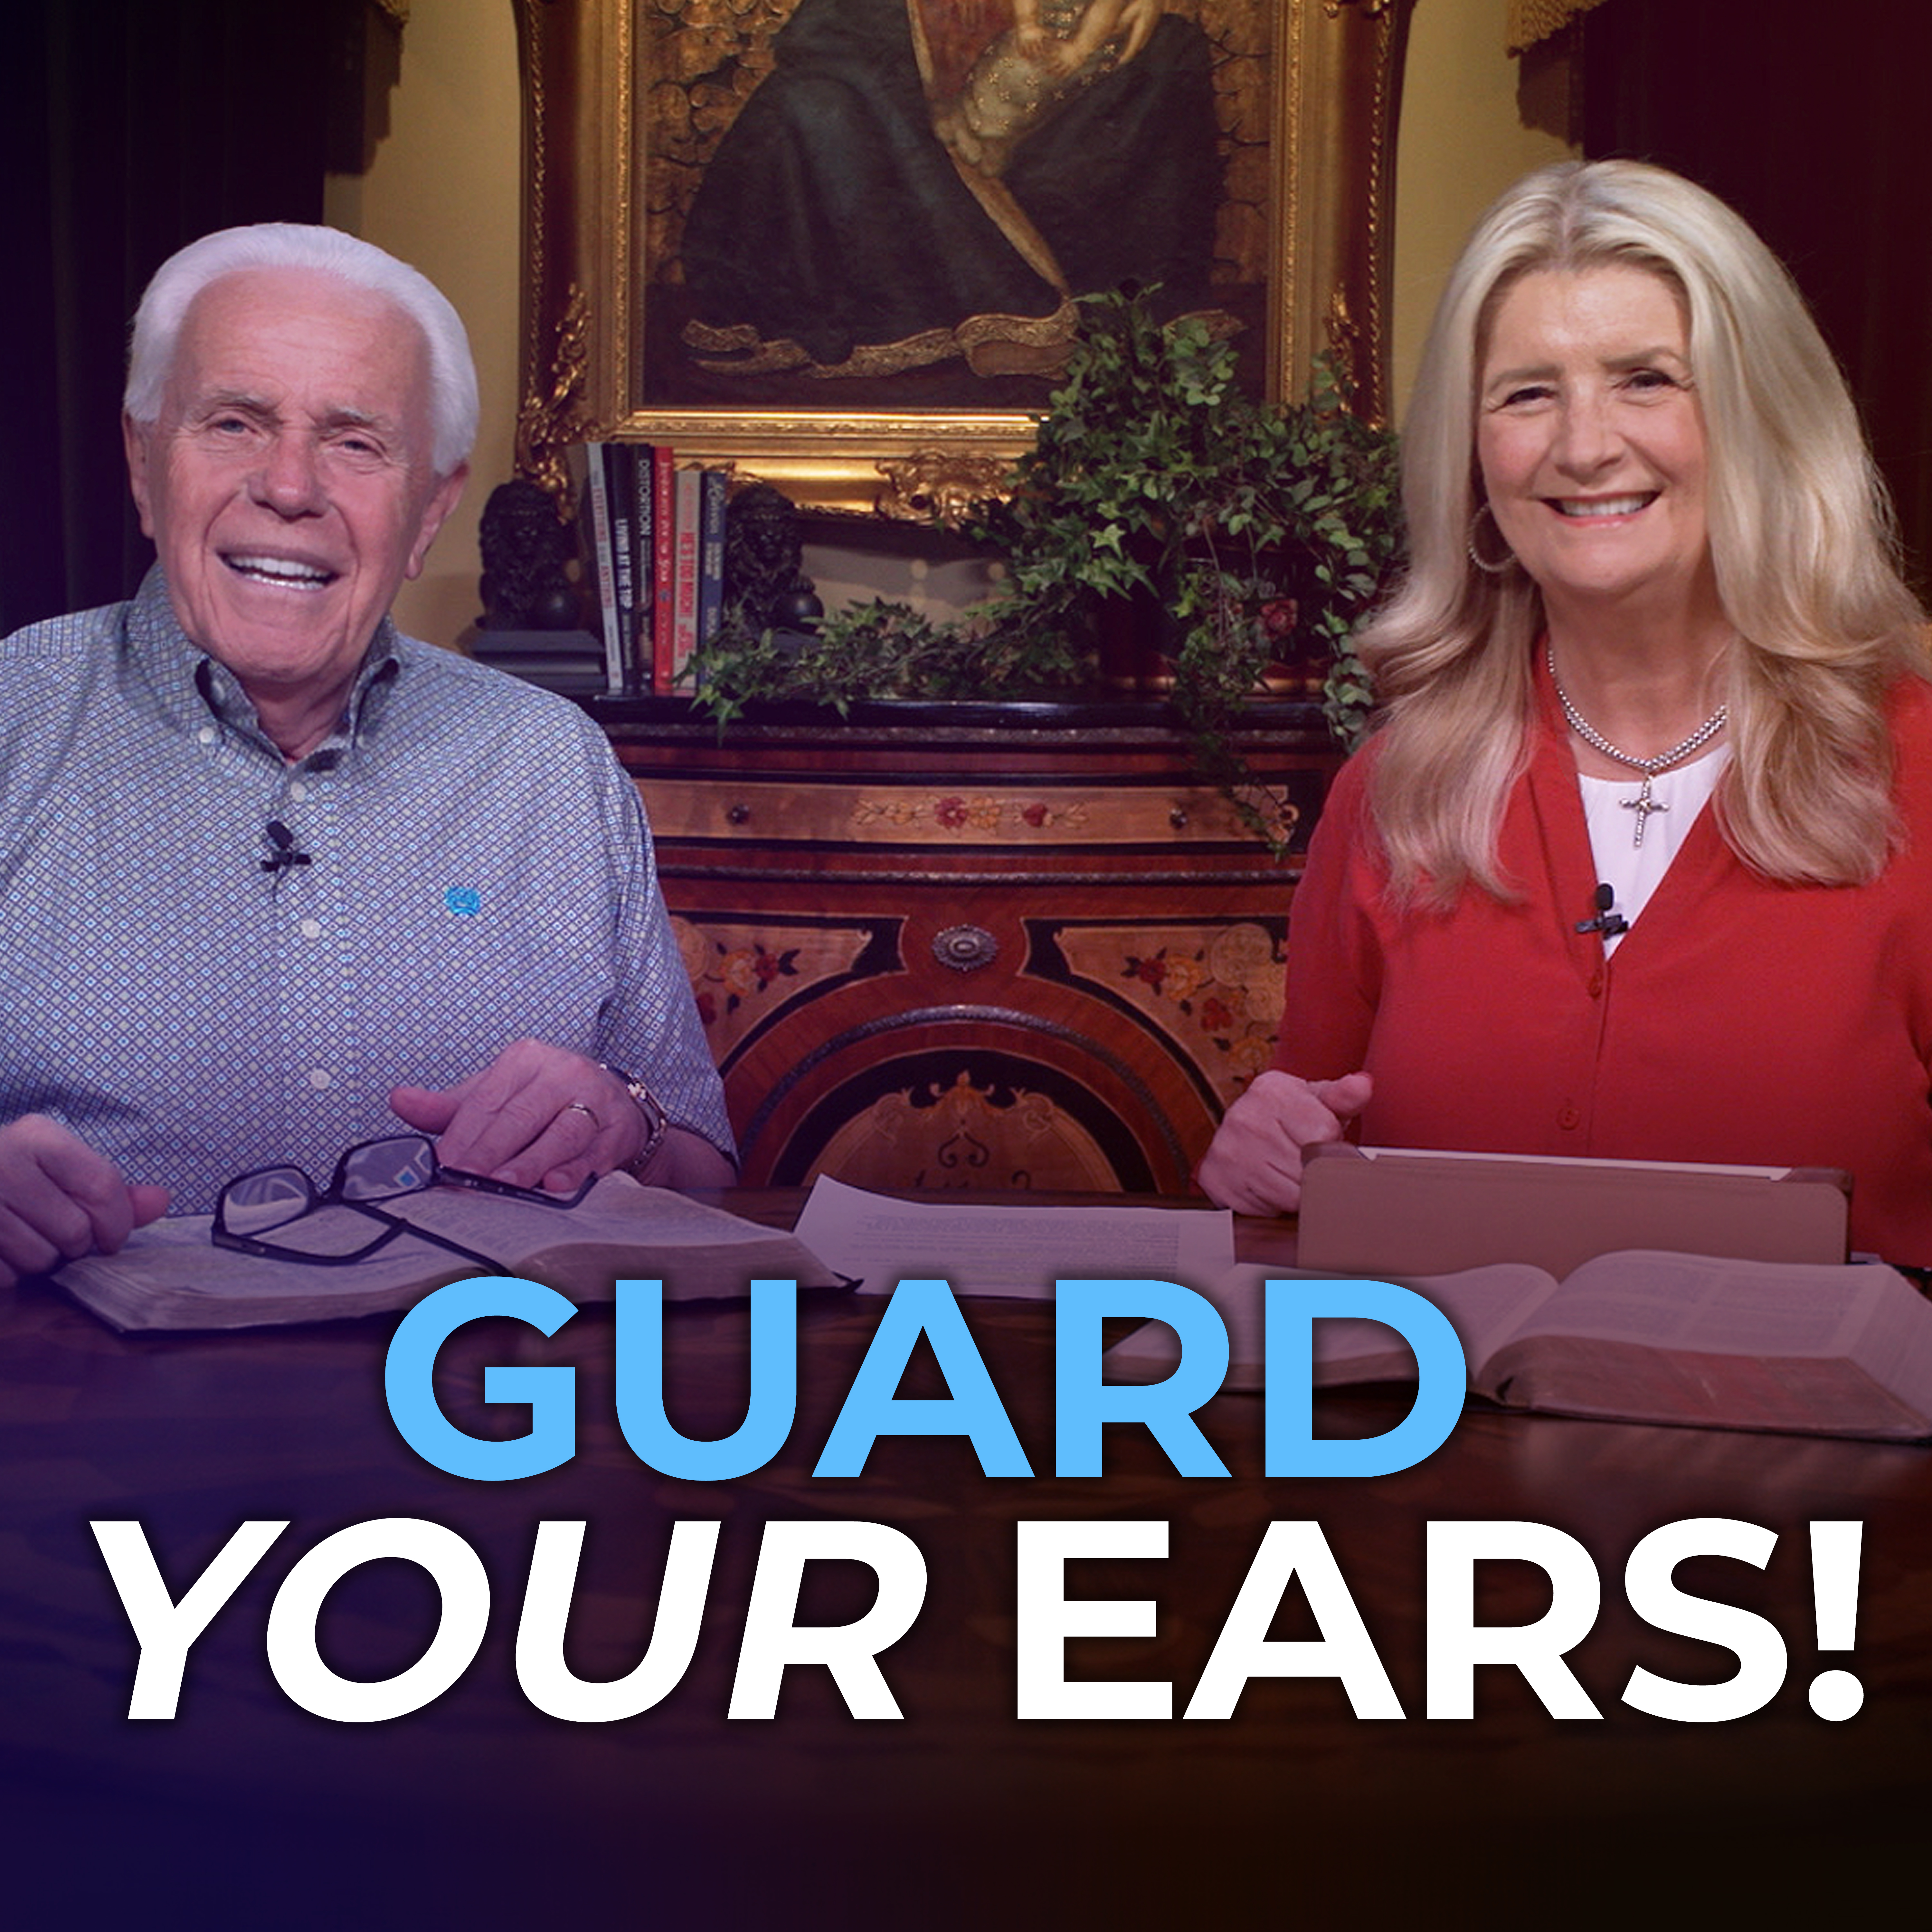 GUARD YOUR EARS!